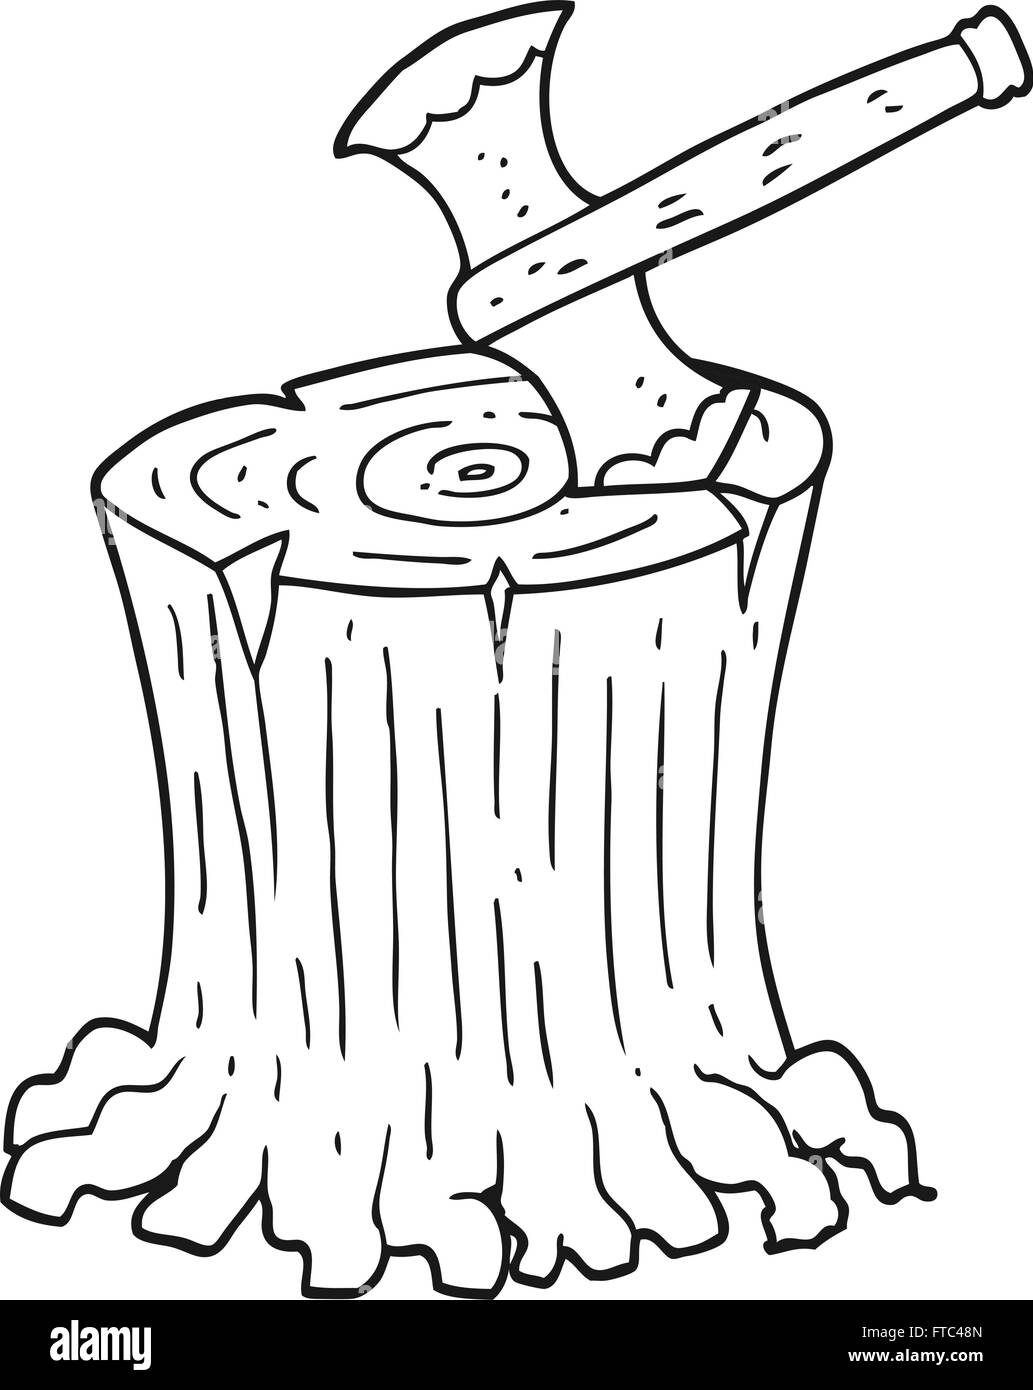 freehand drawn black and white cartoon axe in tree stump Stock Vector